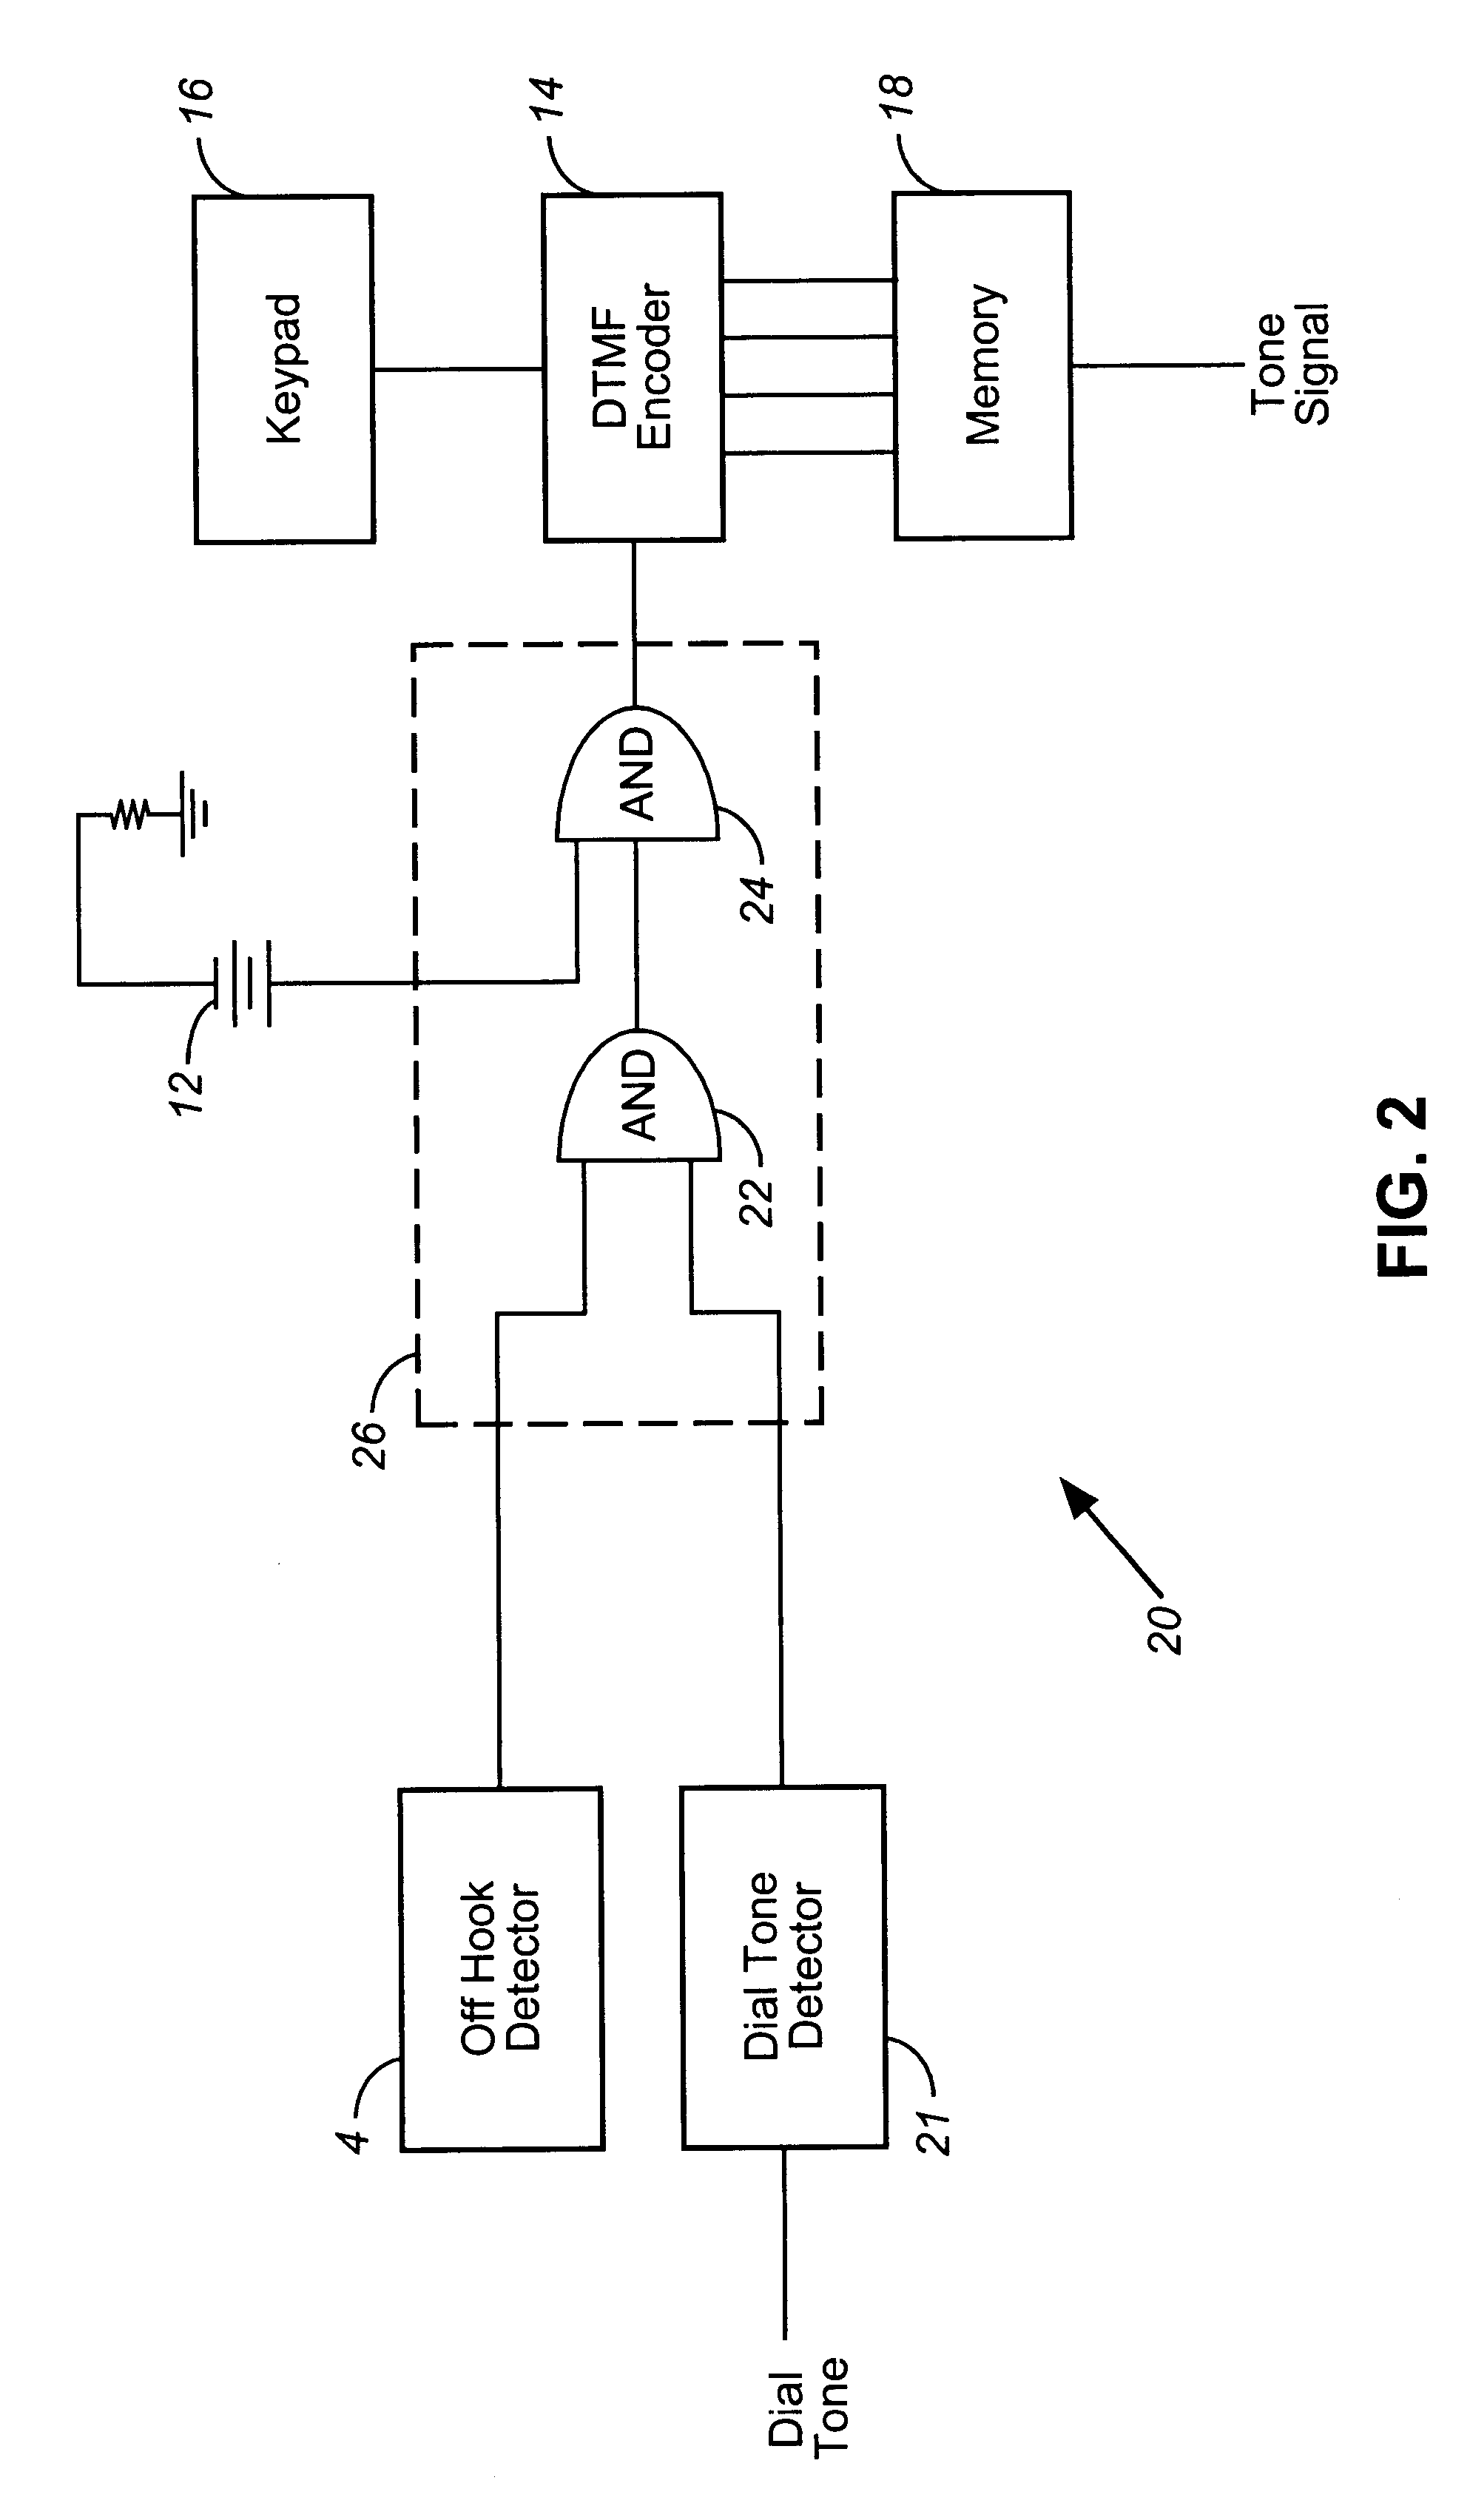 System and method therefor of preventing fraud on pay phone credit/debit calling card authorization